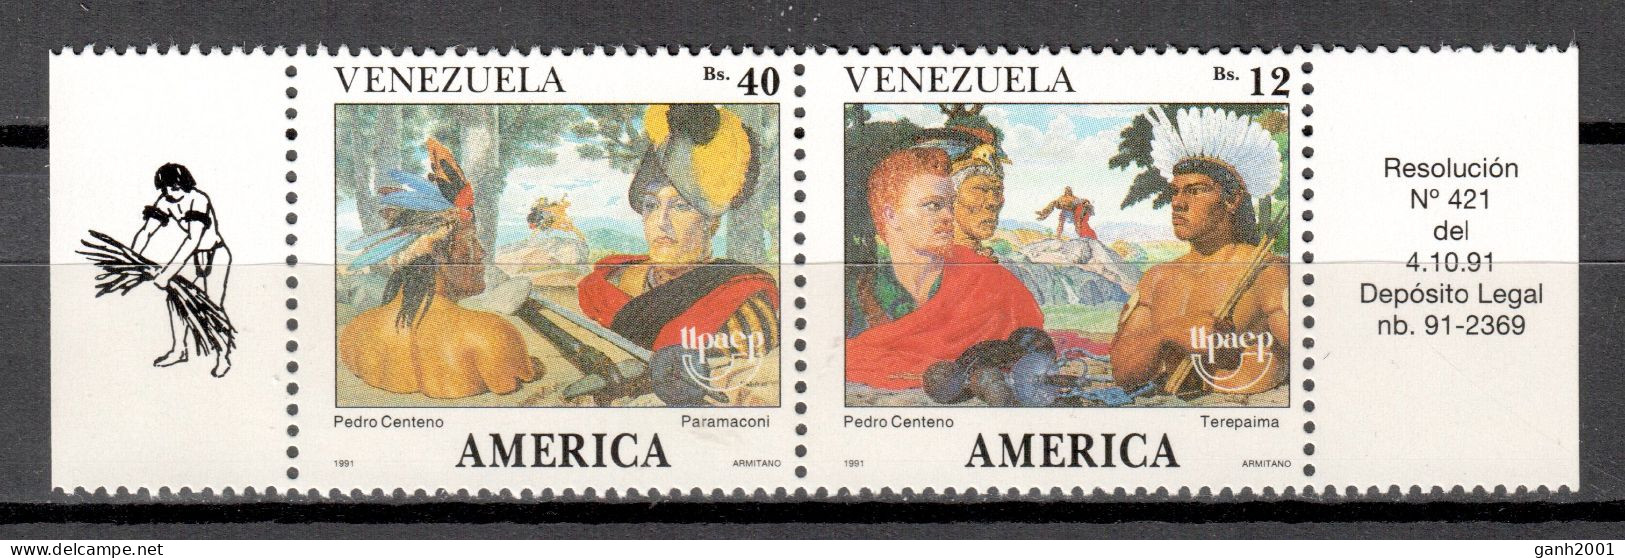 Venezuela 1991 / America UPAEP The World The Conquerors Found MNH / Em31  27-5 - Joint Issues